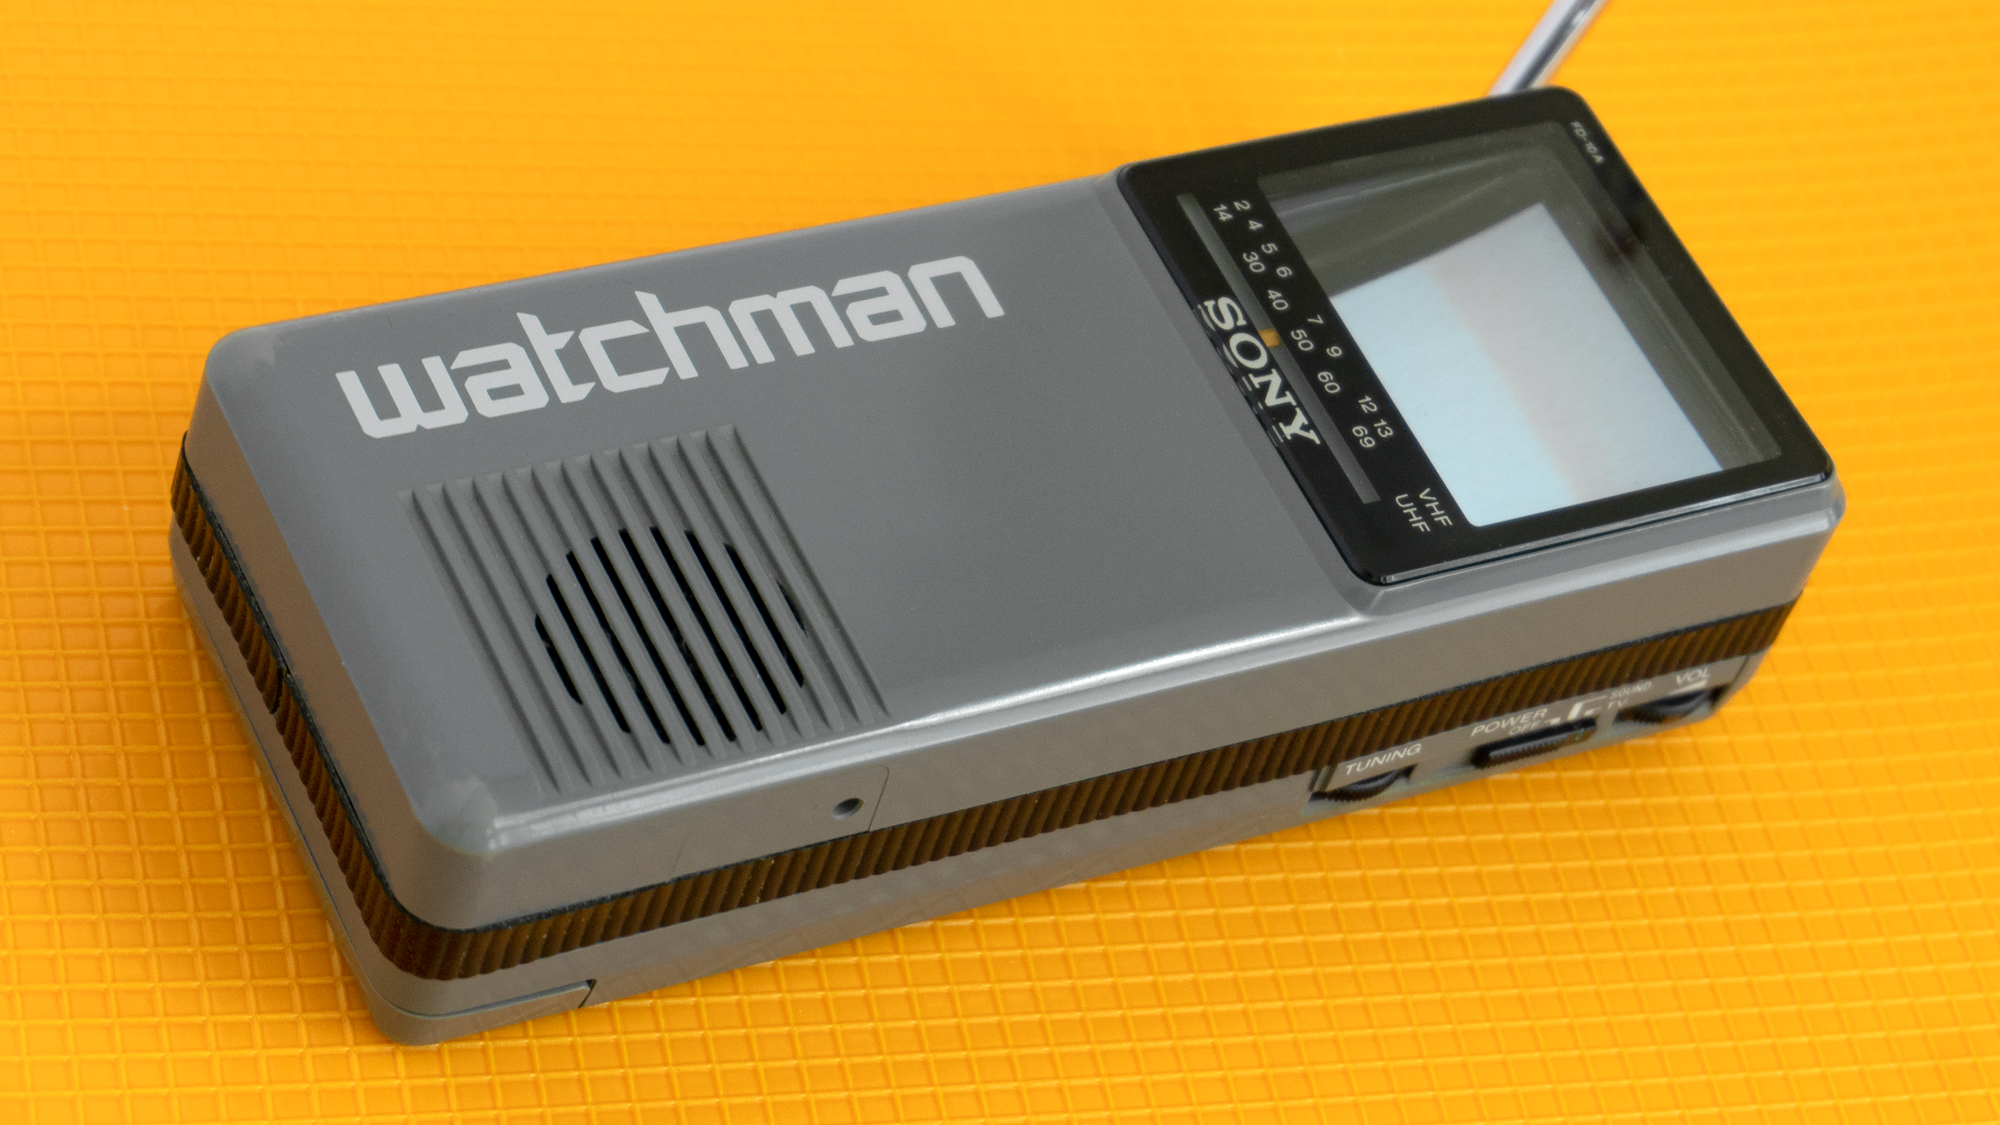 Over 30 years later, my Watchman still works just fine, even if it can only tune in static now. (Photo: Andrew Liszewski/Gizmodo)